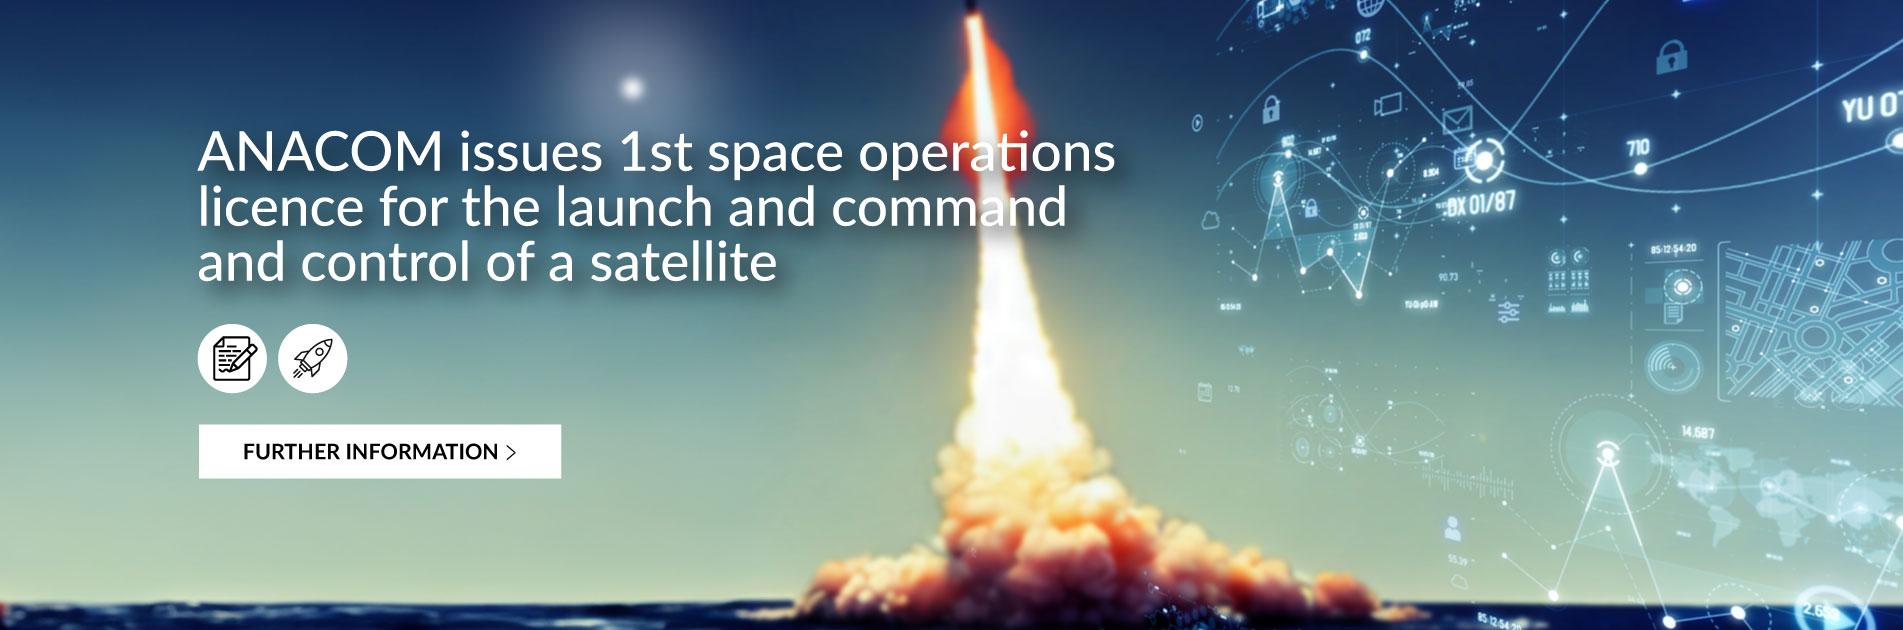 ANACOM issues 1st space operations licence for the launch and command and control of a satellite